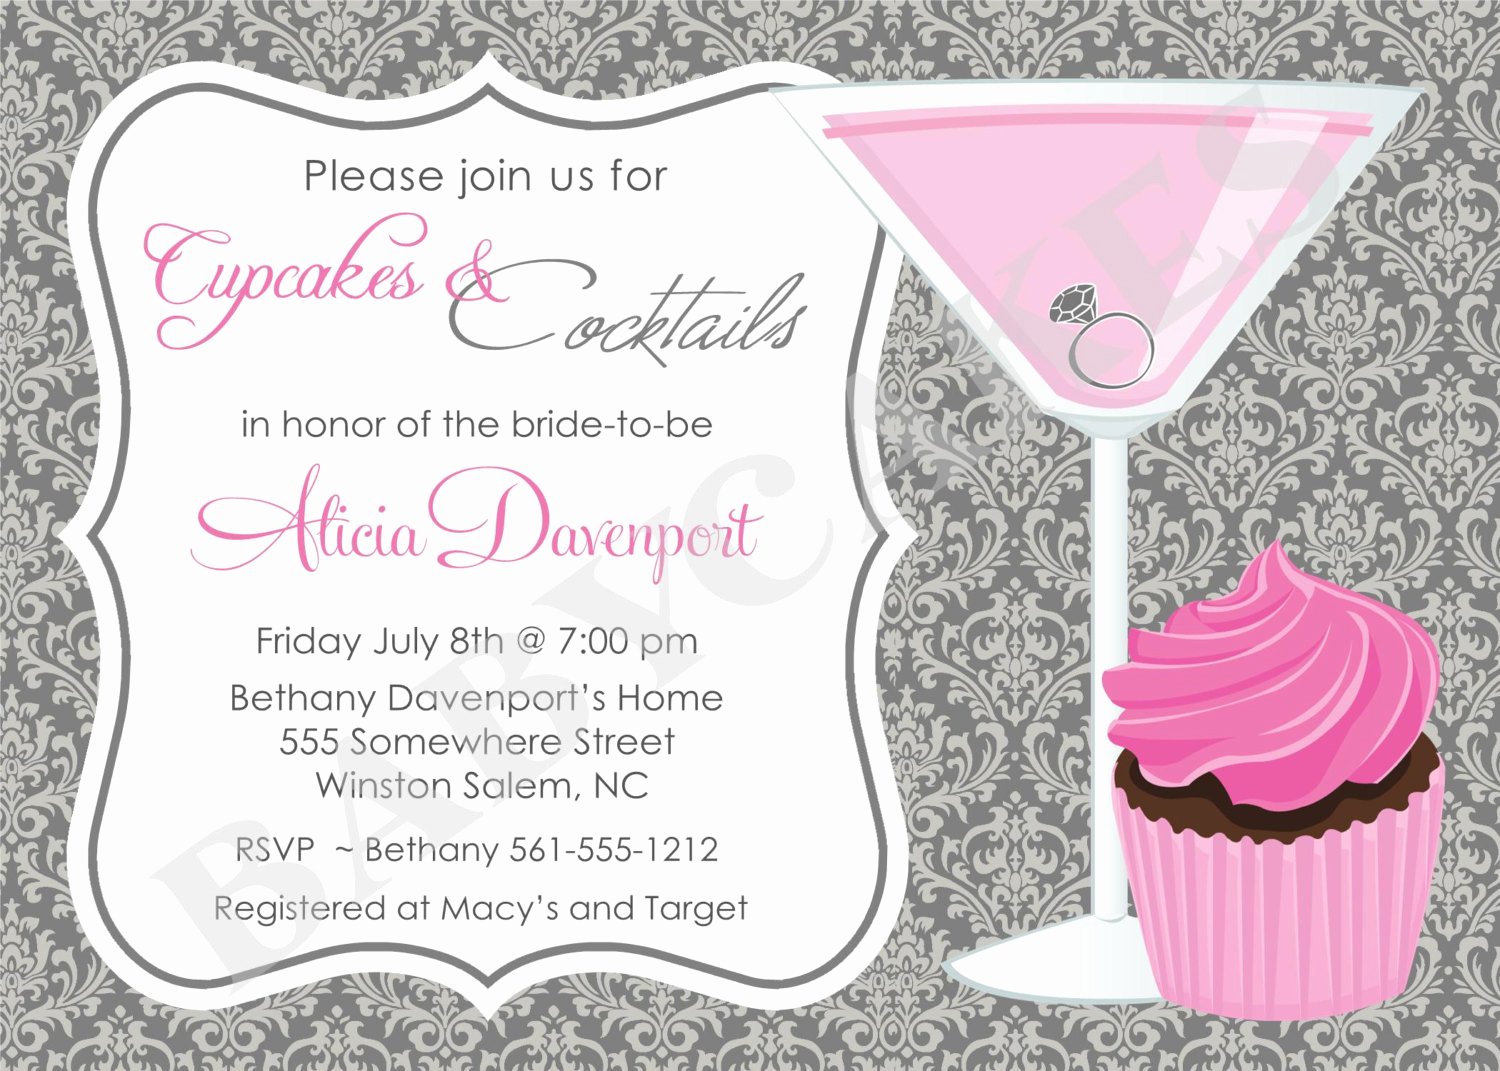 Cocktail Party Invite Templates New Cupcakes and Cocktails Bridal Shower Invitation by Jcbabycakes